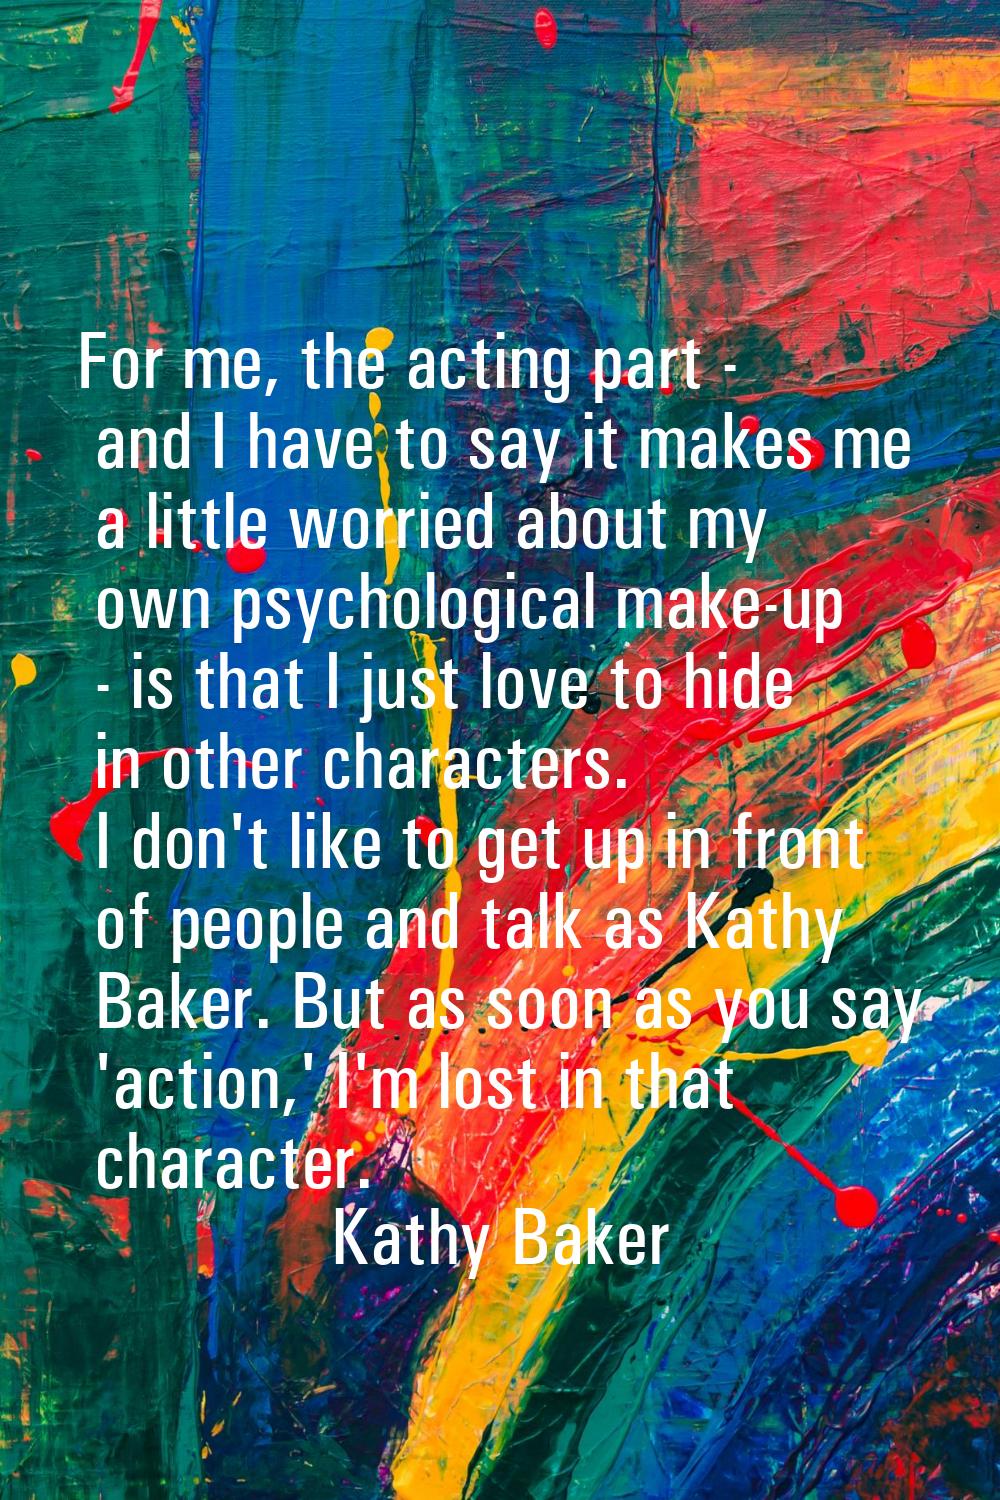 For me, the acting part - and I have to say it makes me a little worried about my own psychological